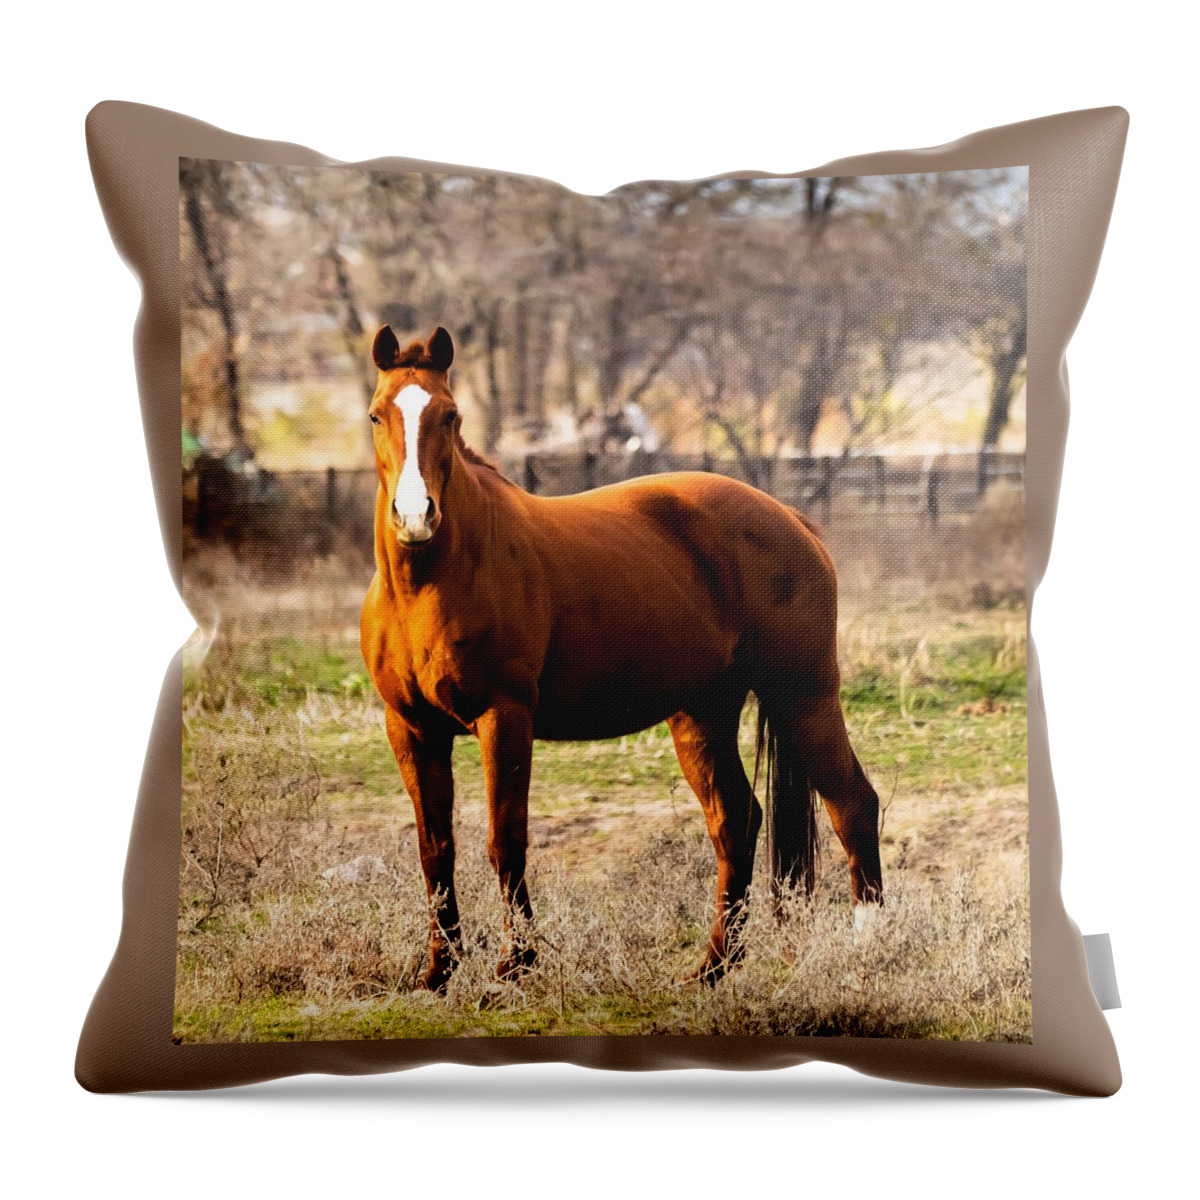 Horse Throw Pillow featuring the photograph Bay Horse 2 by C Winslow Shafer